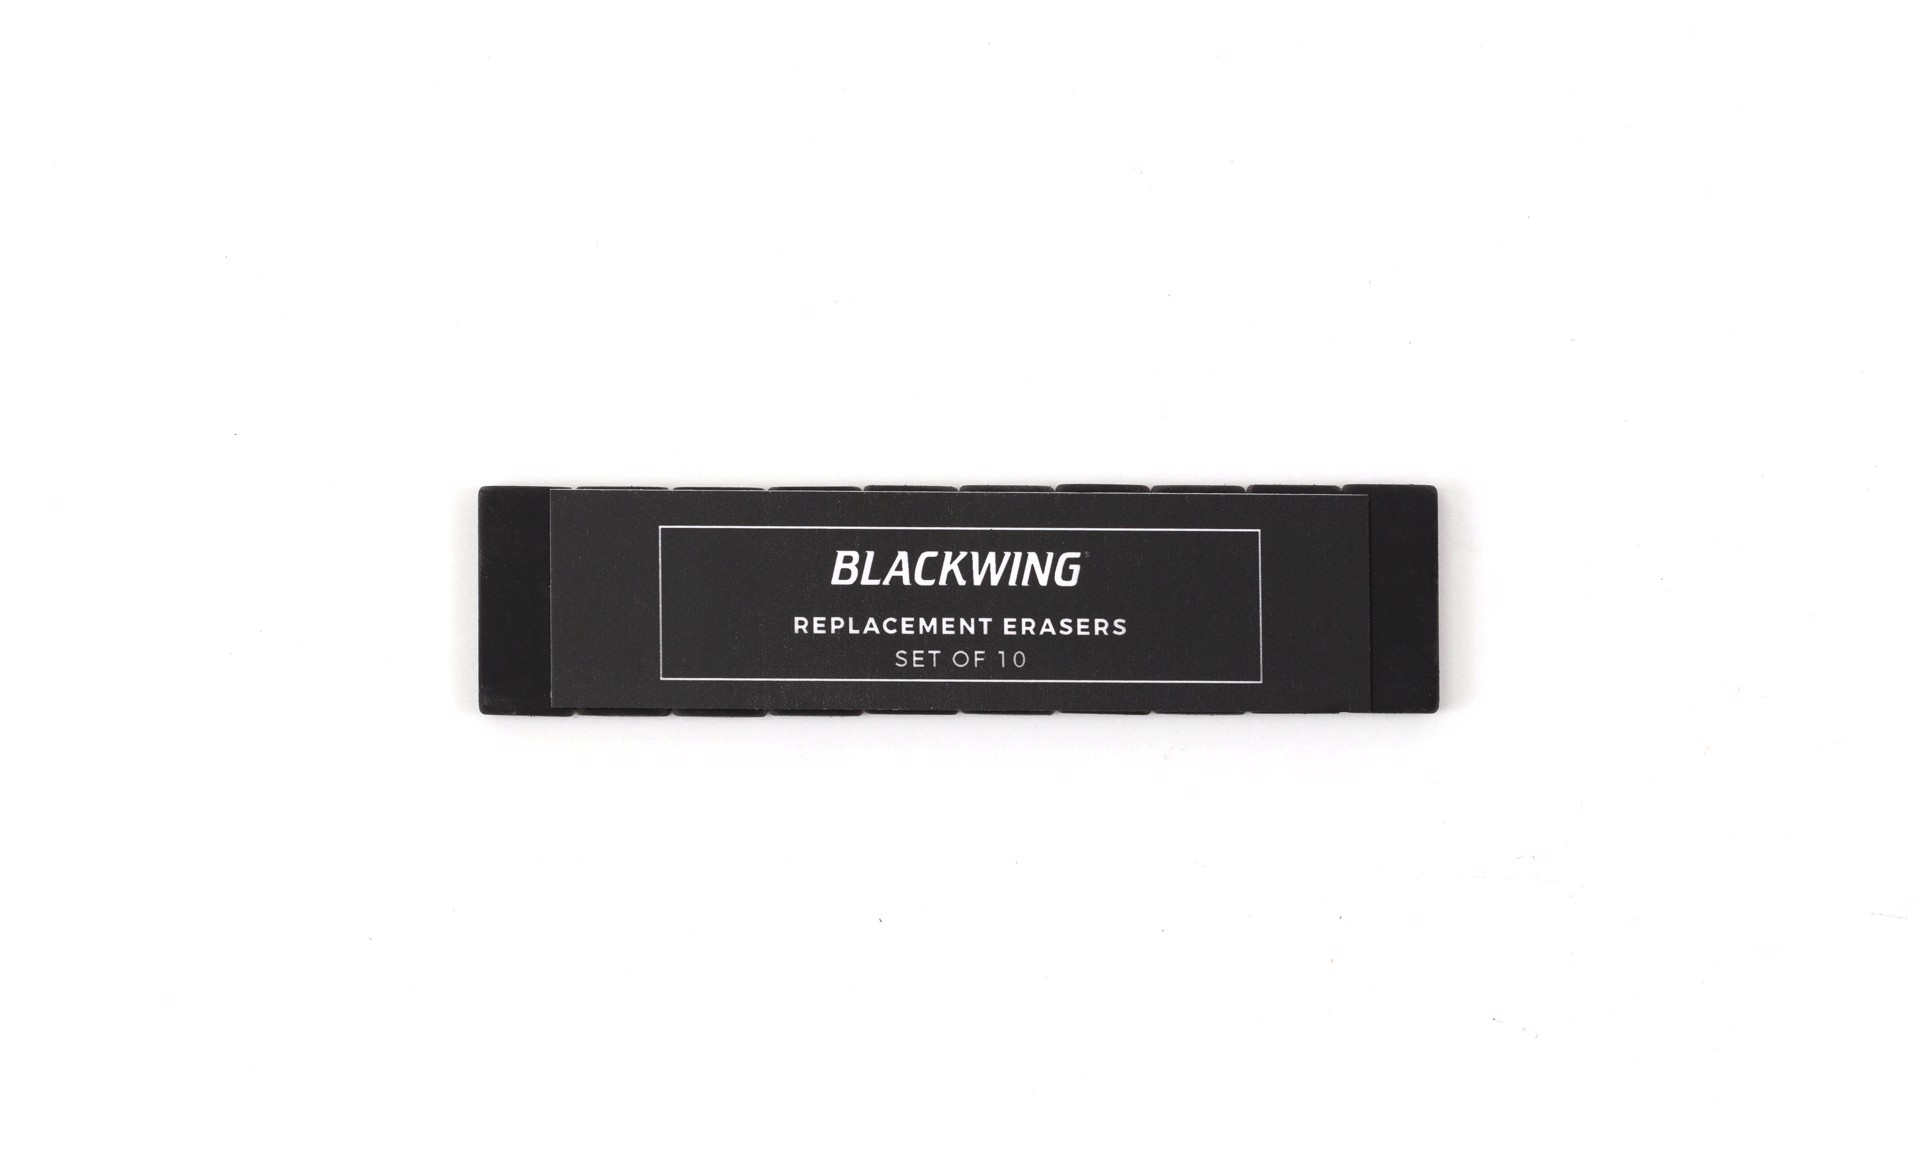 Black Replacement Erasers by Blackwing